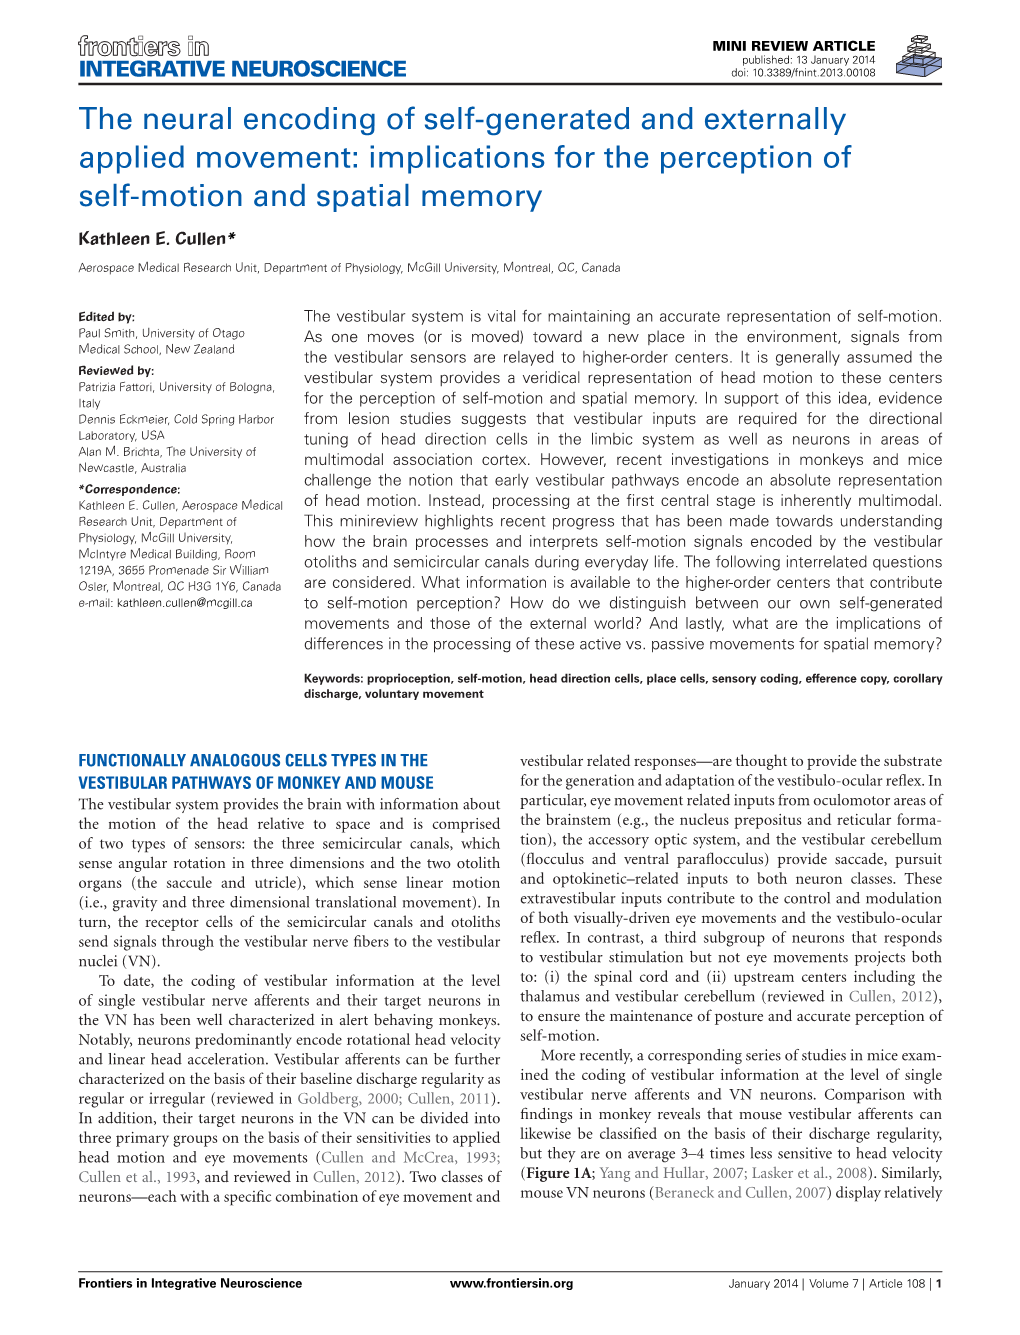 Implications for the Perception of Self-Motion and Spatial Memory